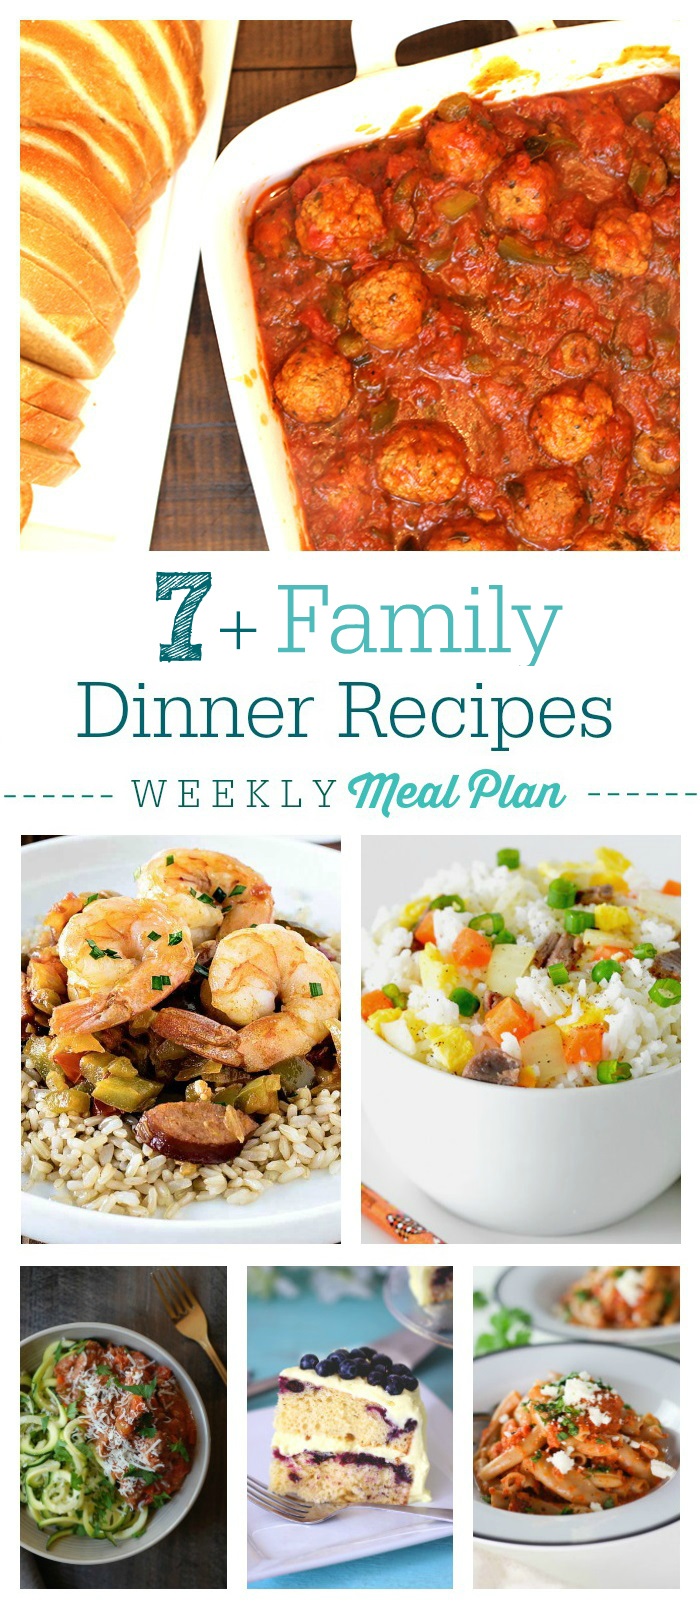 Weekly Meal Plan #7: Family Friendly Dinner Recipes | Cutefetti